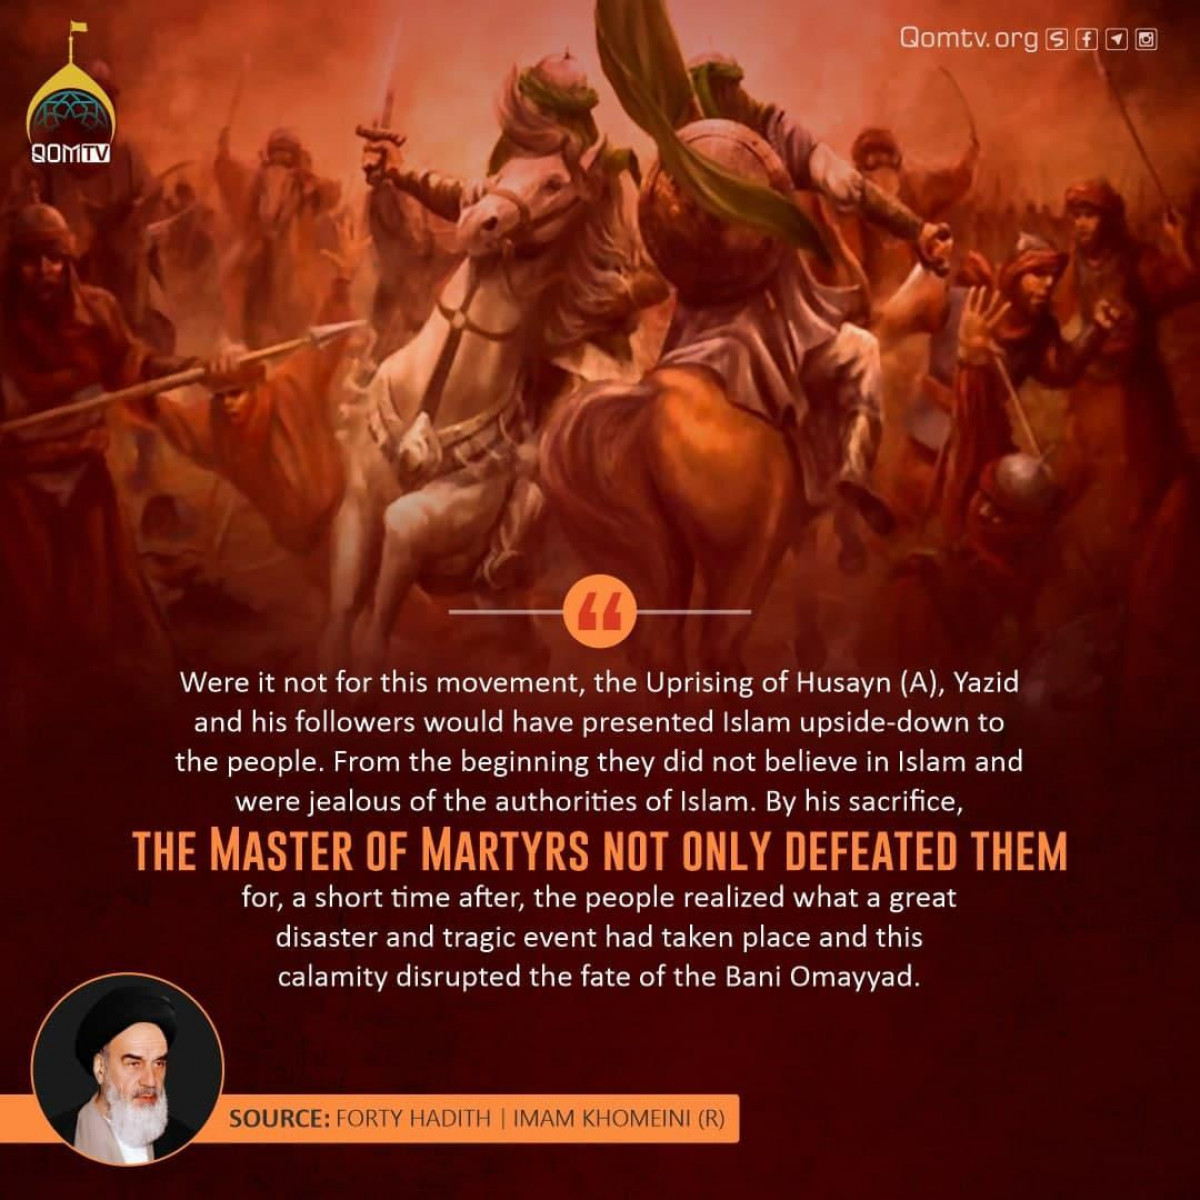 Were it not for this movement, the Uprising of Husayn (A), Yazid and his followers would have presented Islam upside-down to the people